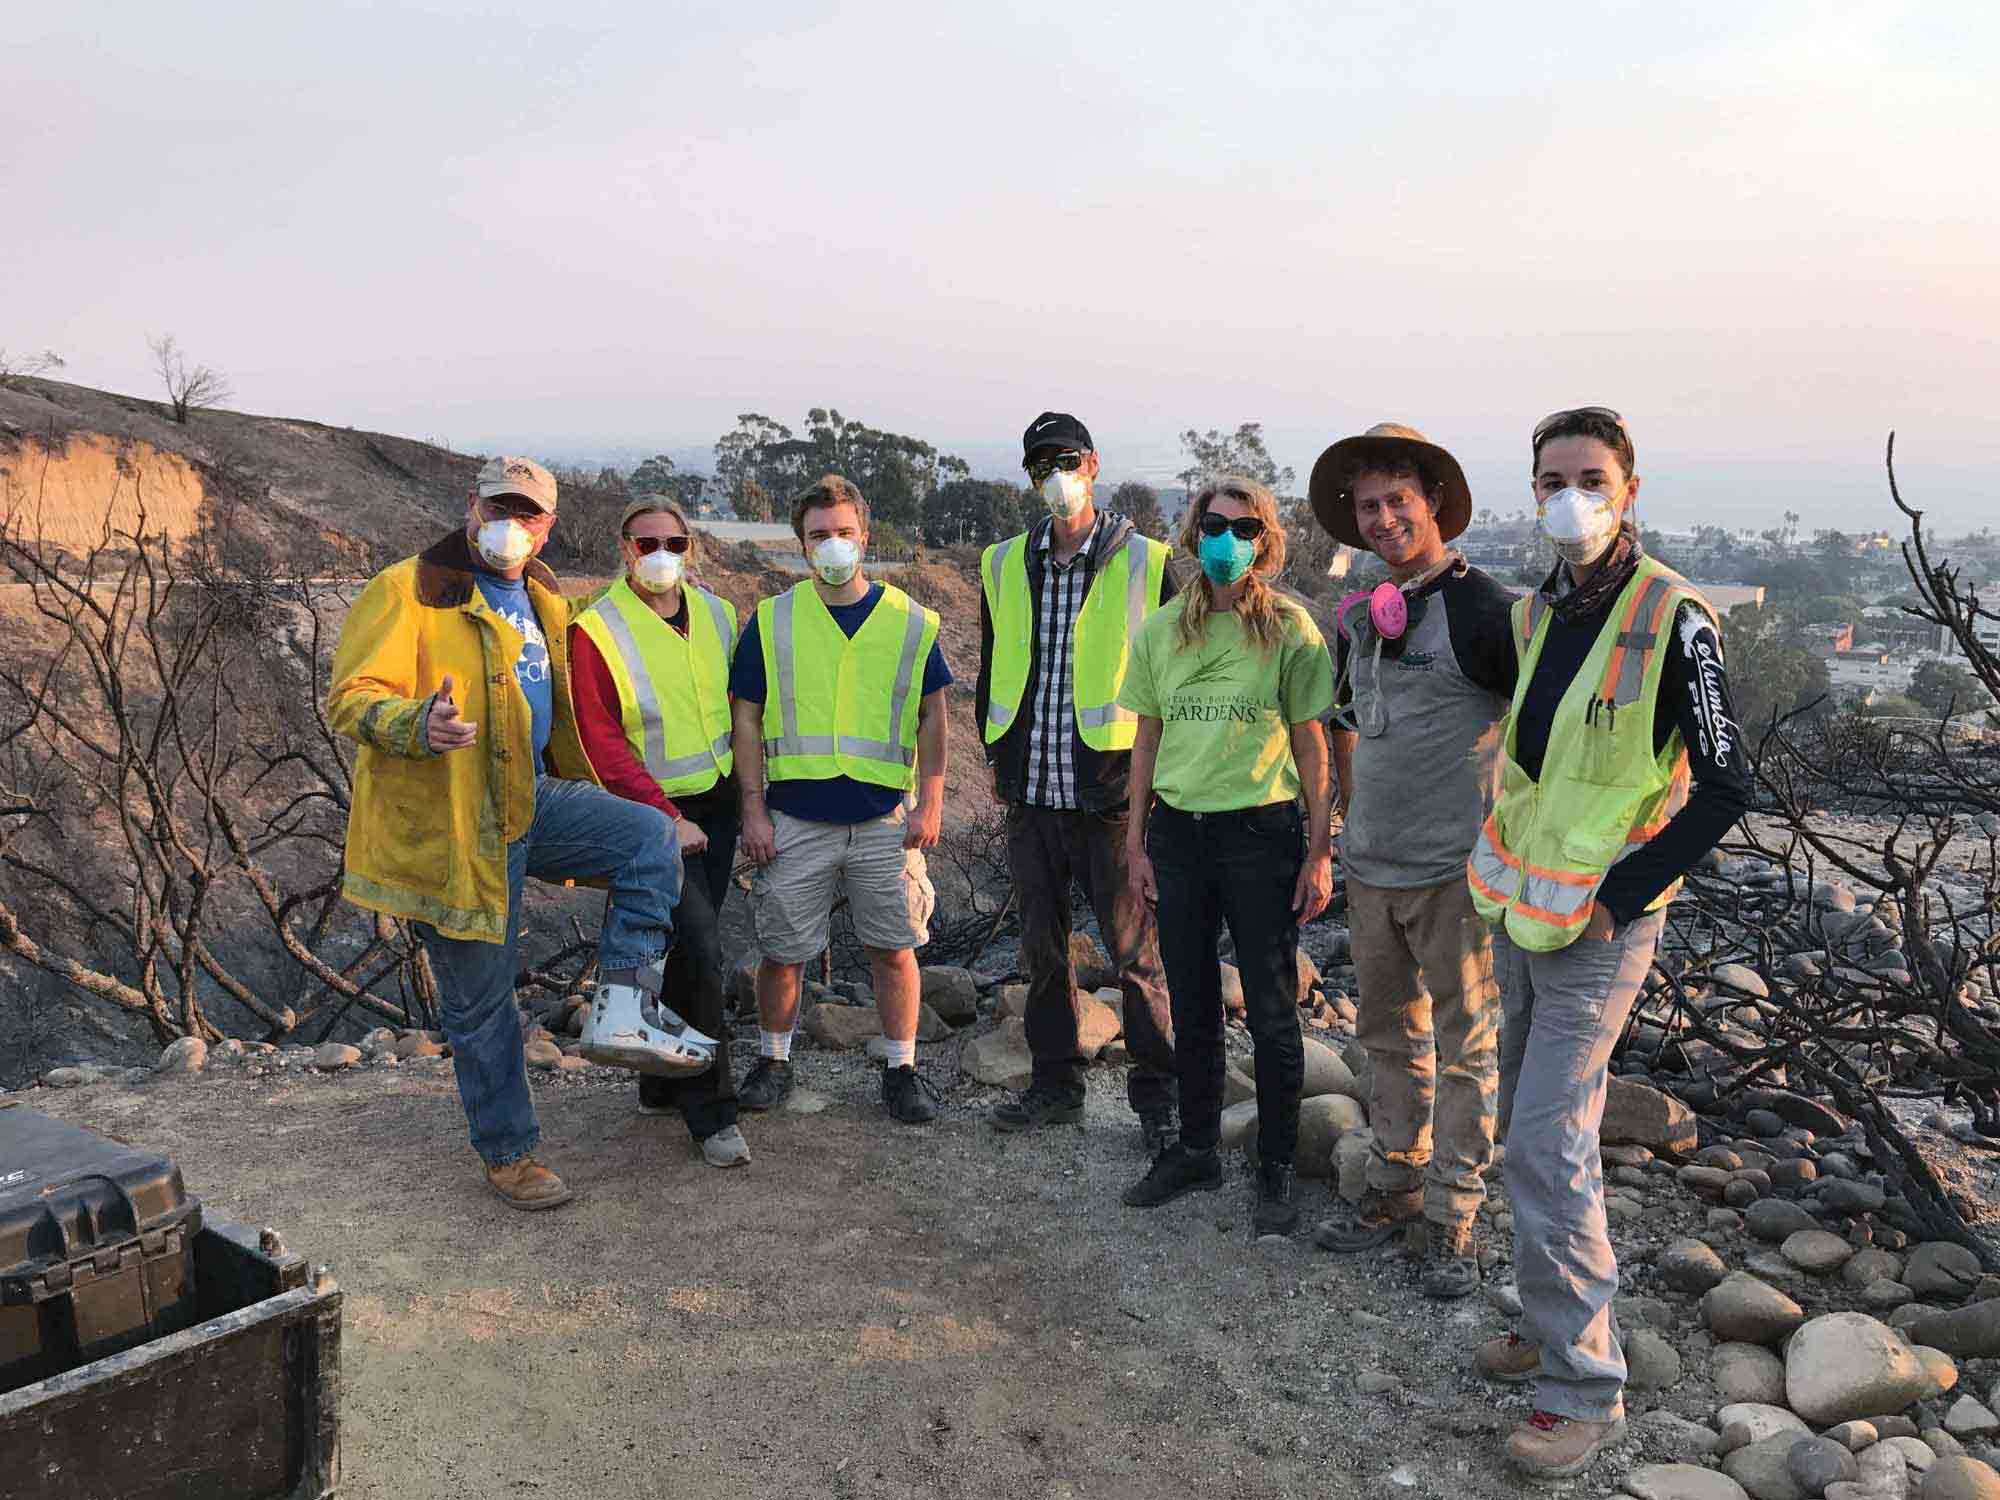 An Environmental Science & Resource Management capstone class spent a year monitoring oil and gas seeps after the 2017 Thomas Fire at the request of Climate First: Replacing Oil & Gas.